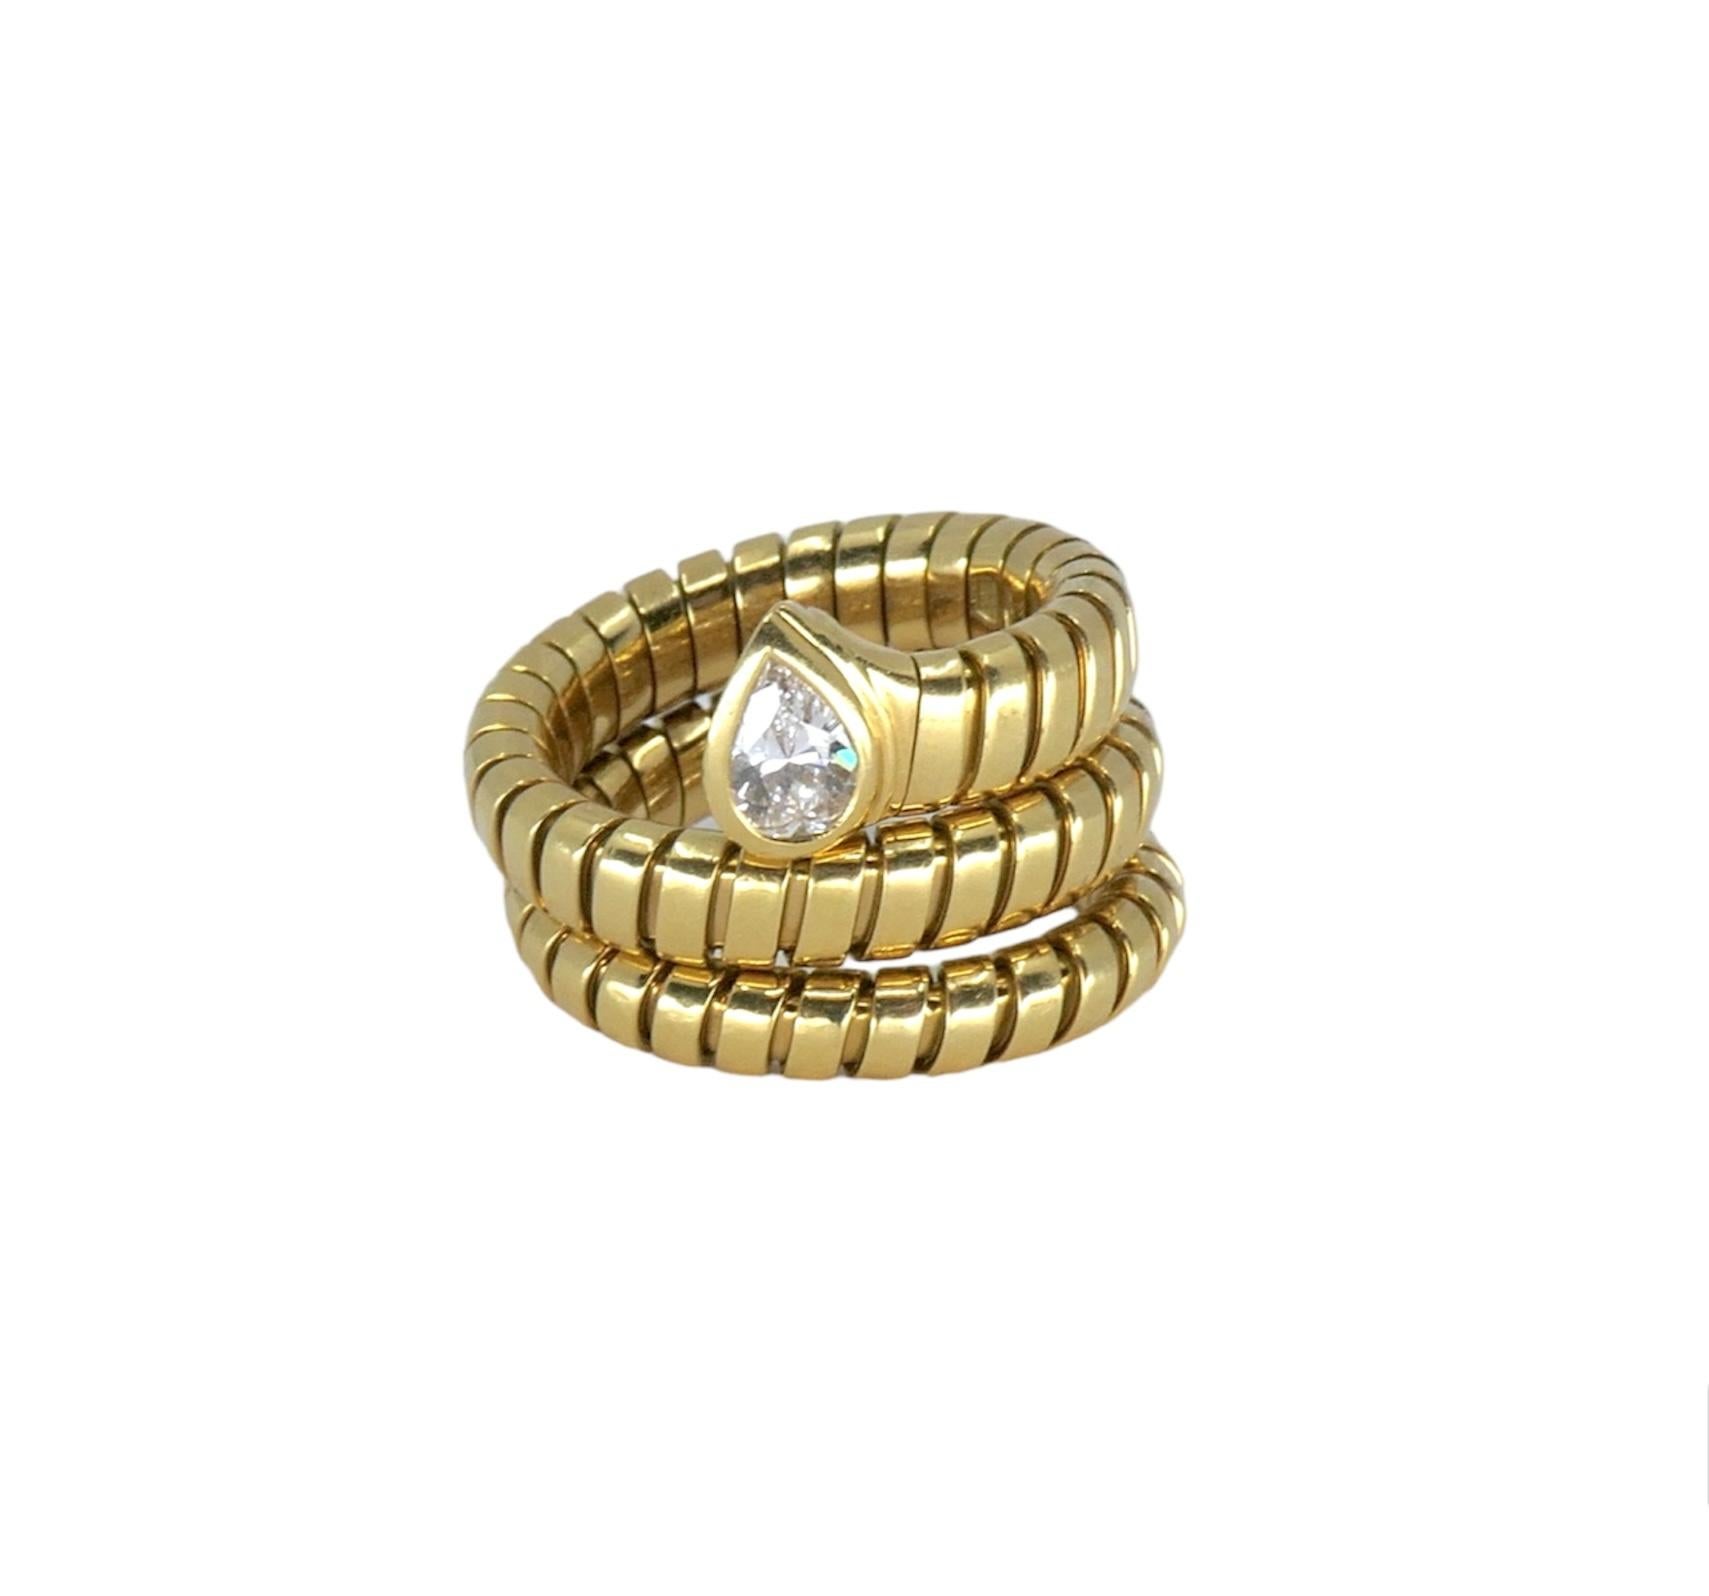 DESIGNER: Bulgari
CIRCA: 1990’s
MATERIALS: 18K Yellow Gold
GEMSTONE: 0.40 cts. Diamond
WEIGHT: 16.1 grams
RING SIZE: 6.75 - 7.5
HALLMARKS: BVLGARI, 750, Made in ITALY, *2337AL

A beloved Serpenti Tubogas rign by Bulgari, made of 18k gold, features a